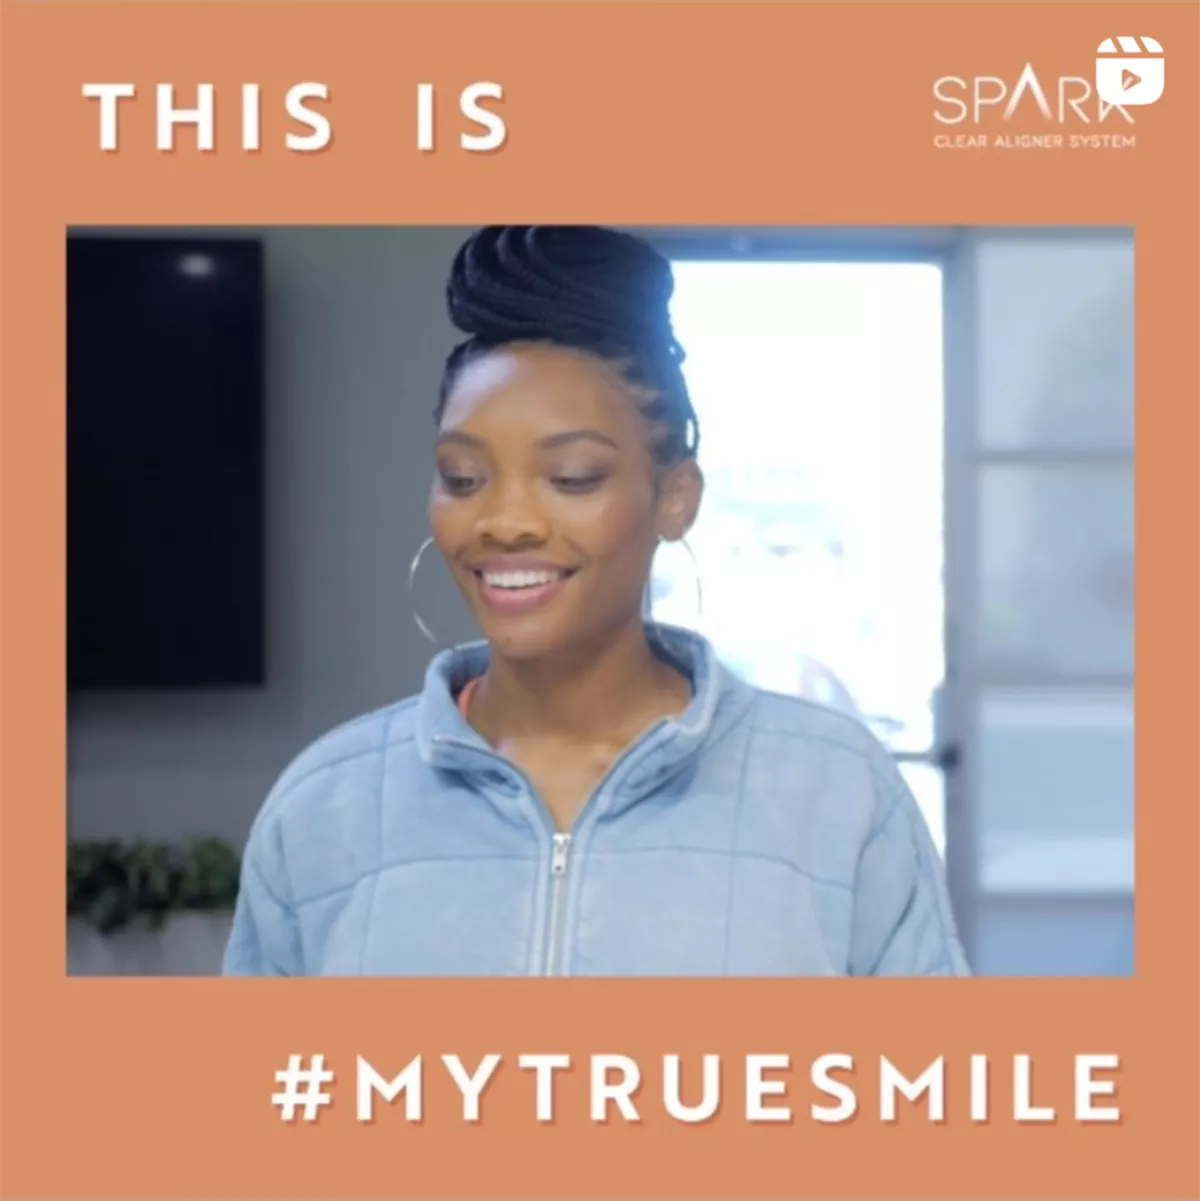 MyTrueSmile-Spark young woman